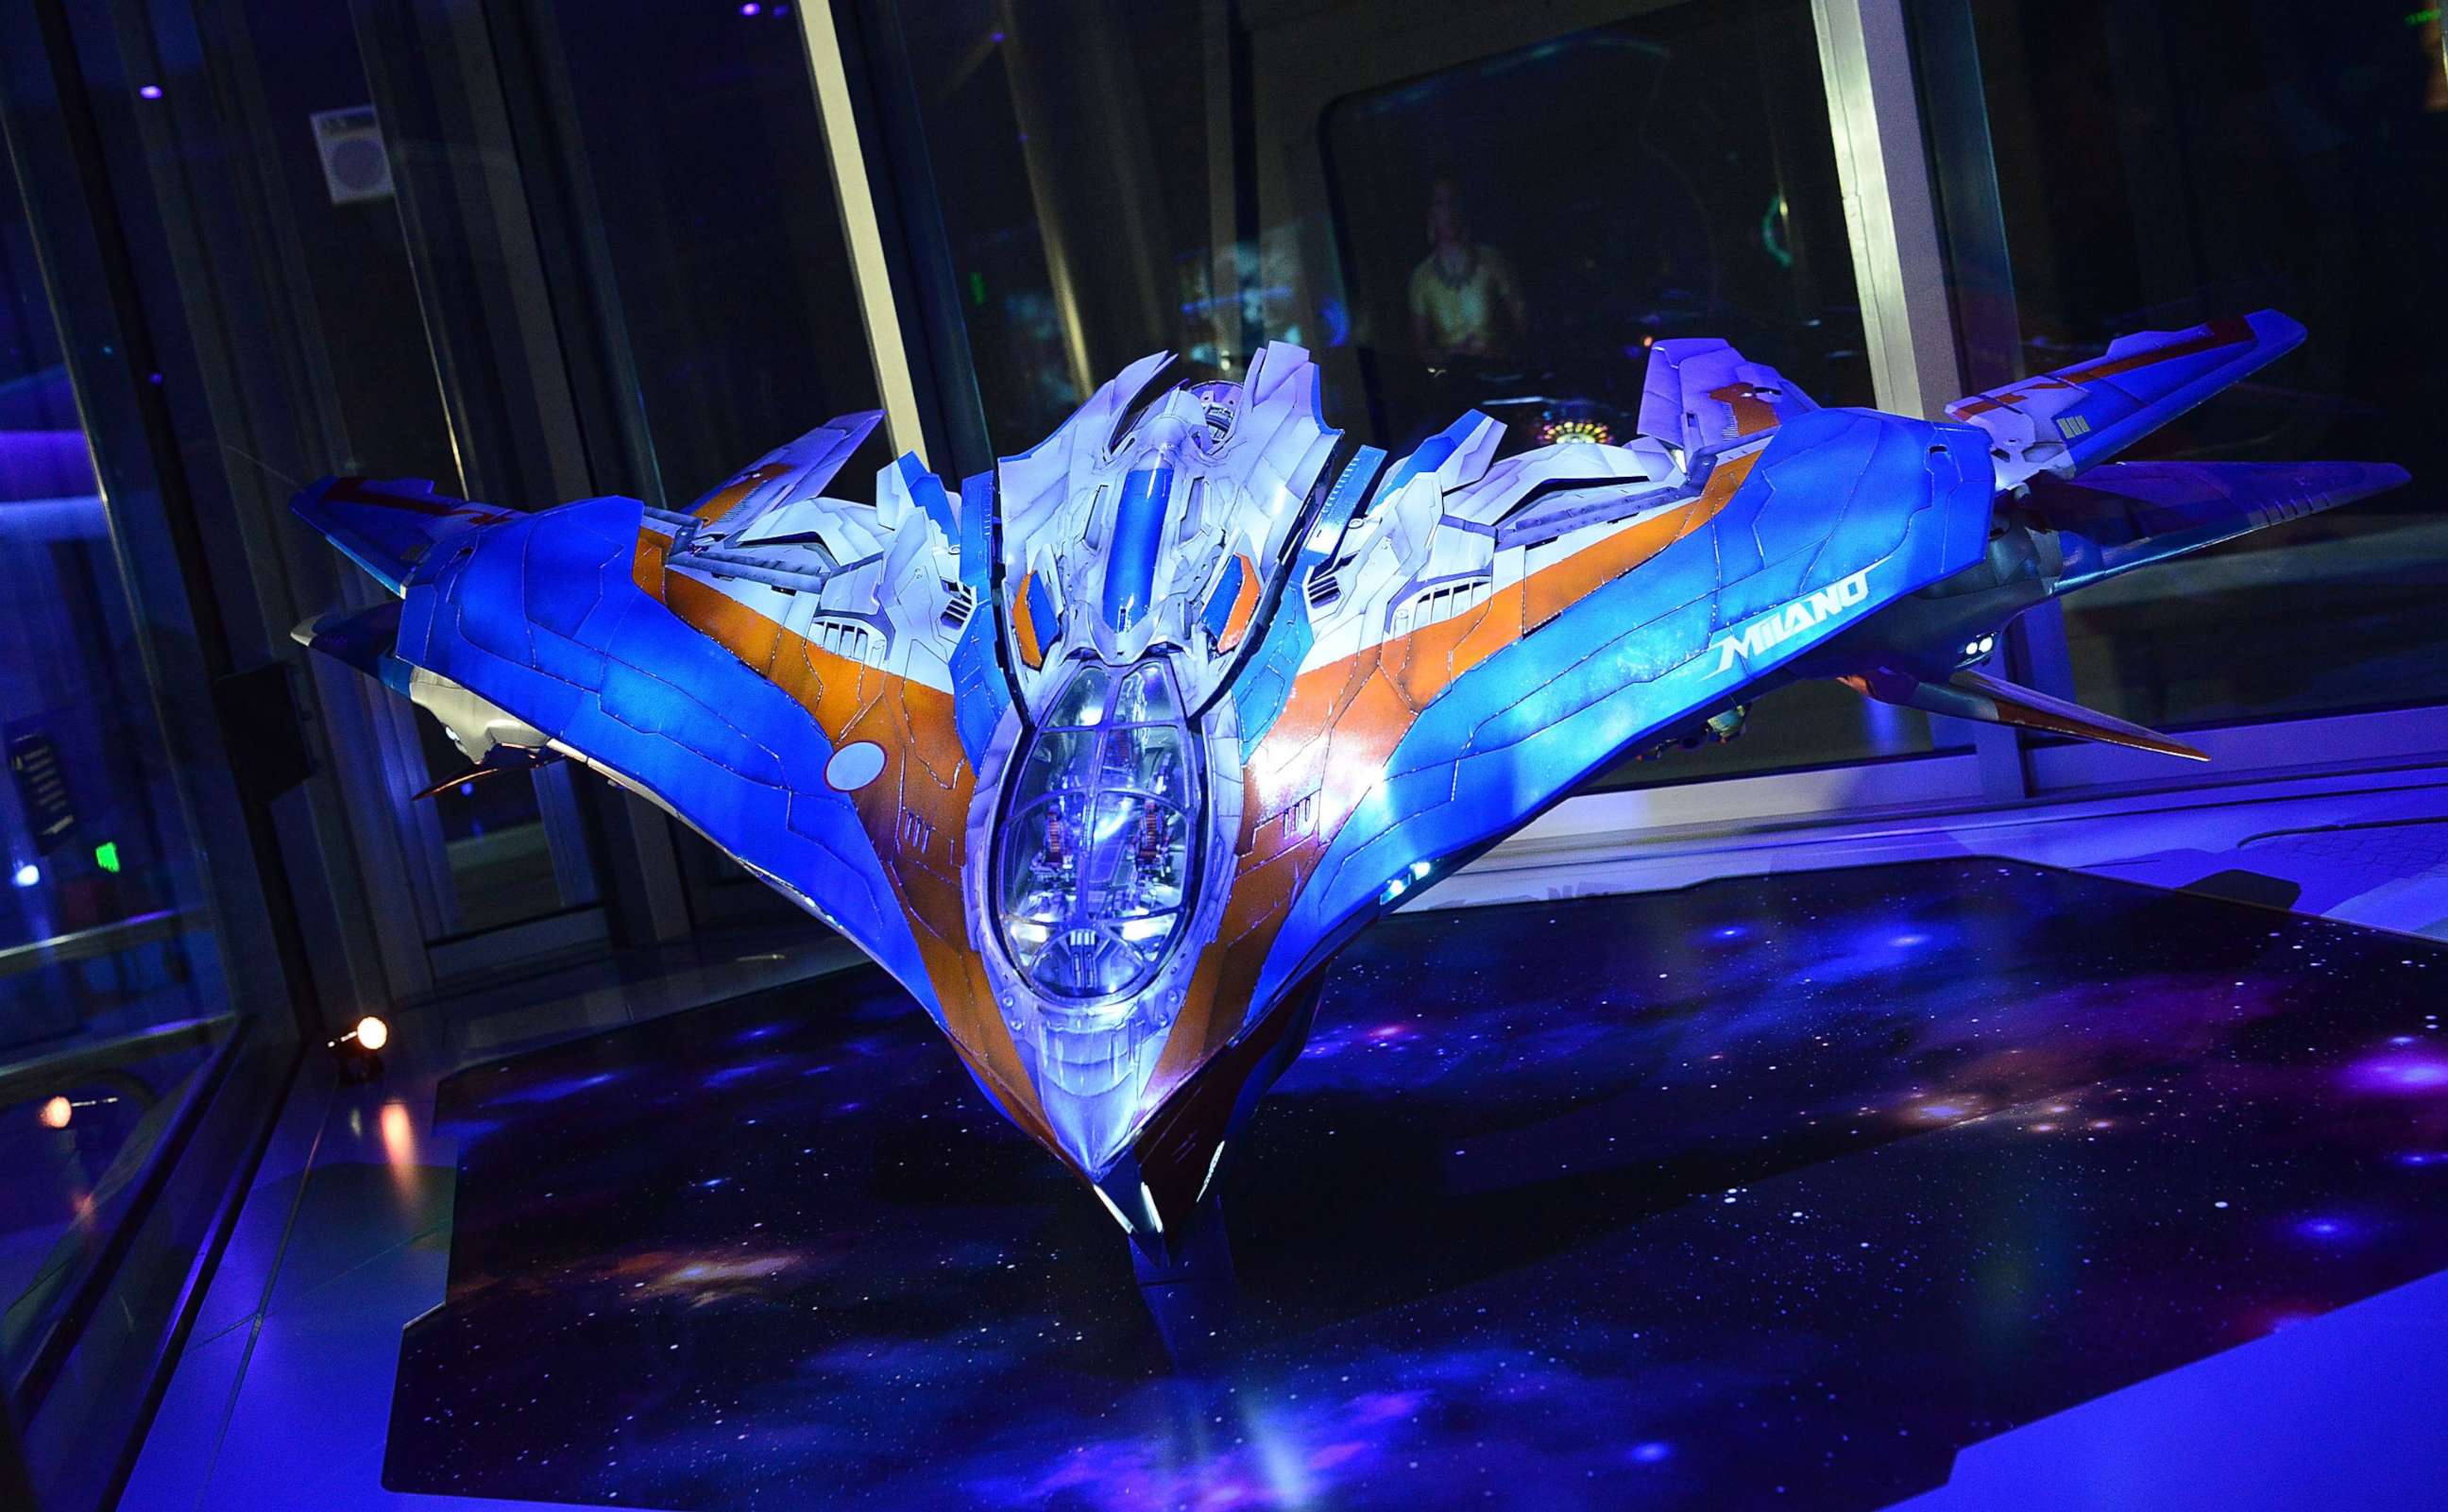 Check out the new Guardians of the Galaxy Cosmic Rewind attraction at